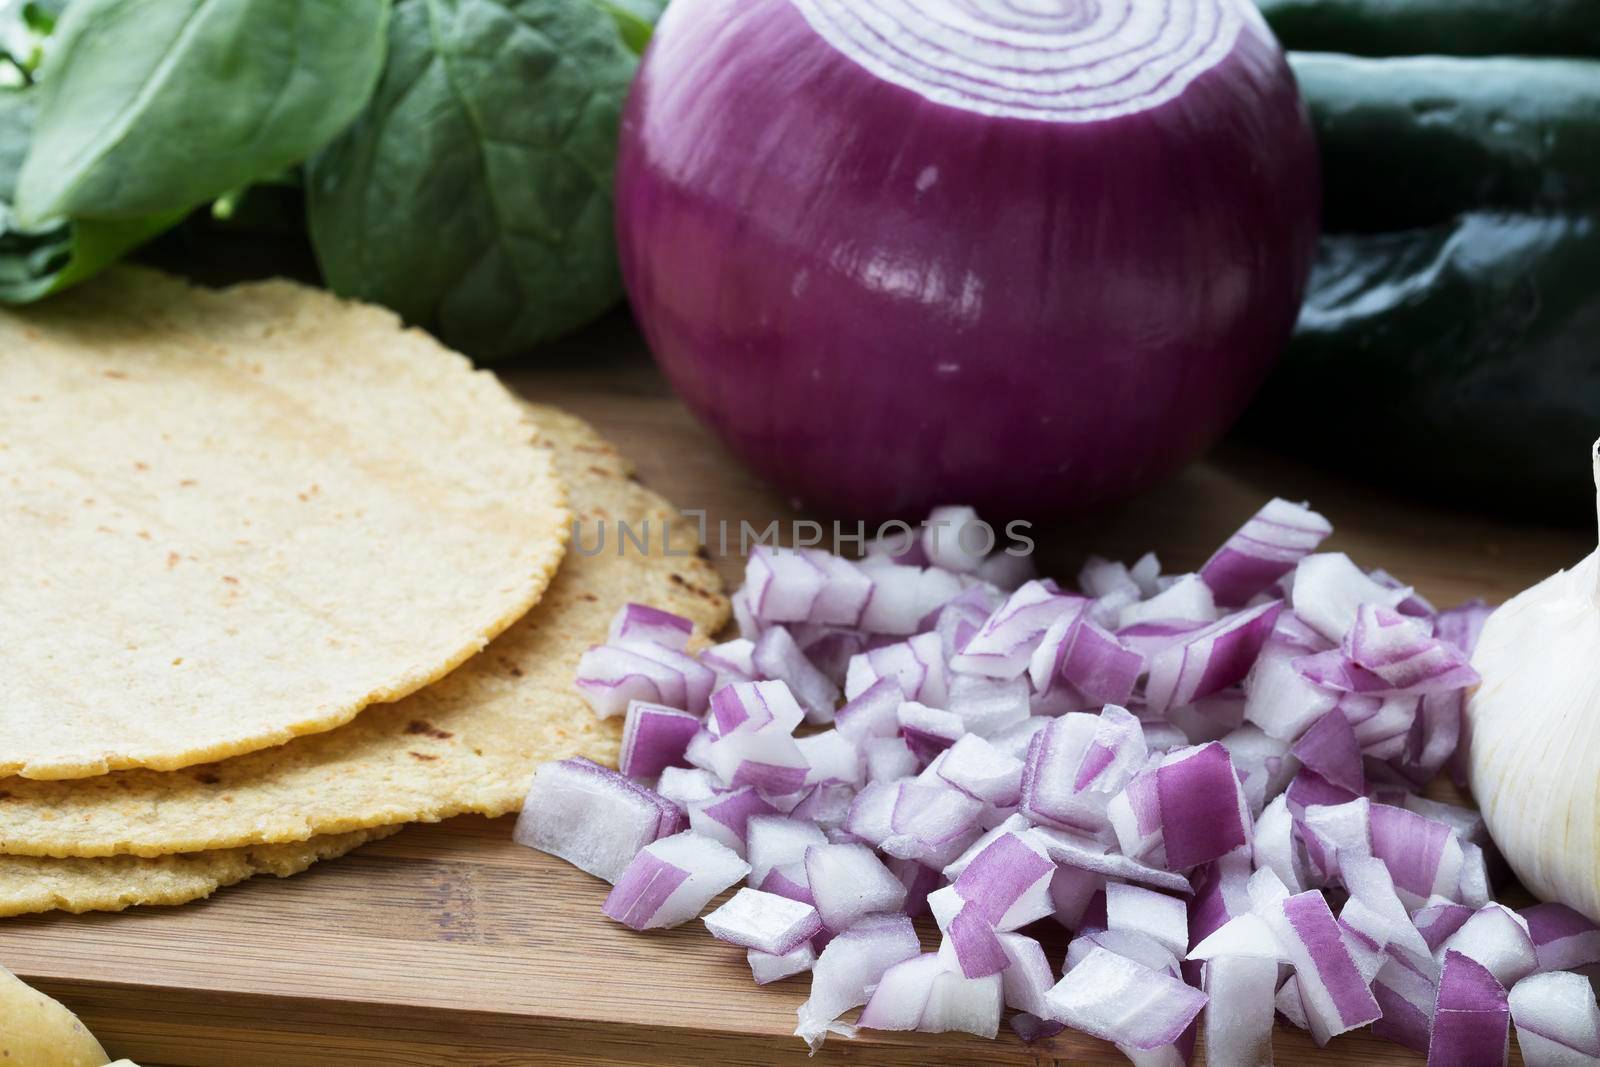 Chopped red onions with corn tortillas and other ingredients.